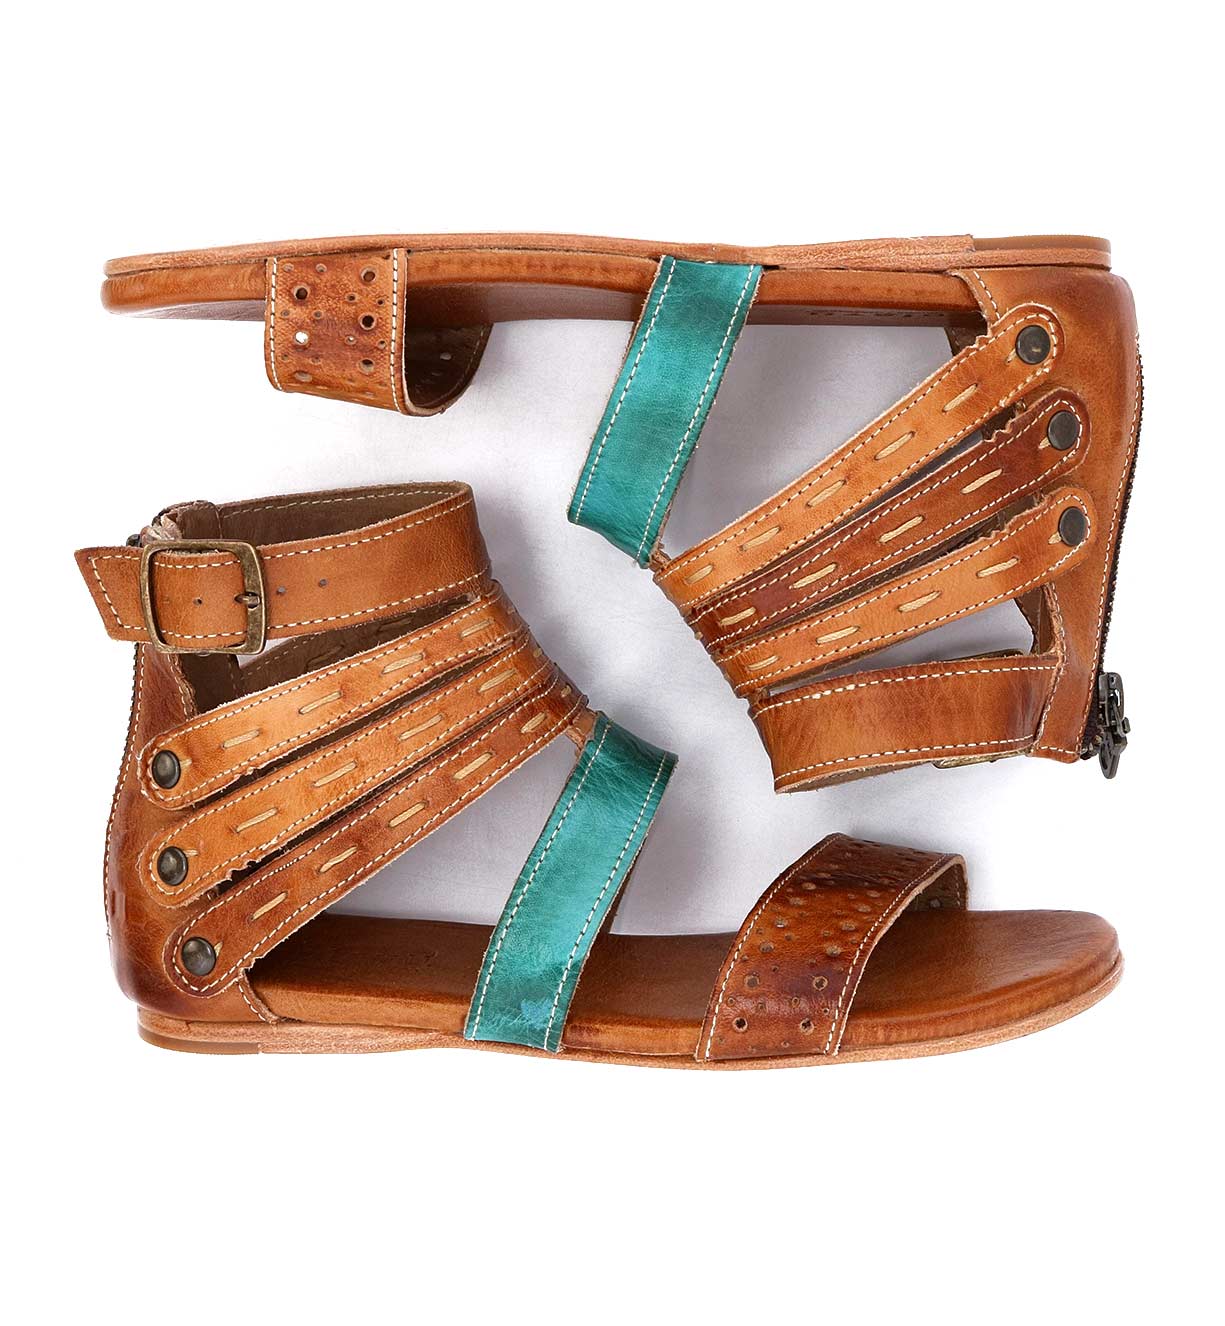 A pair of Bed Stu Artemis women's sandals with tan and turquoise straps.